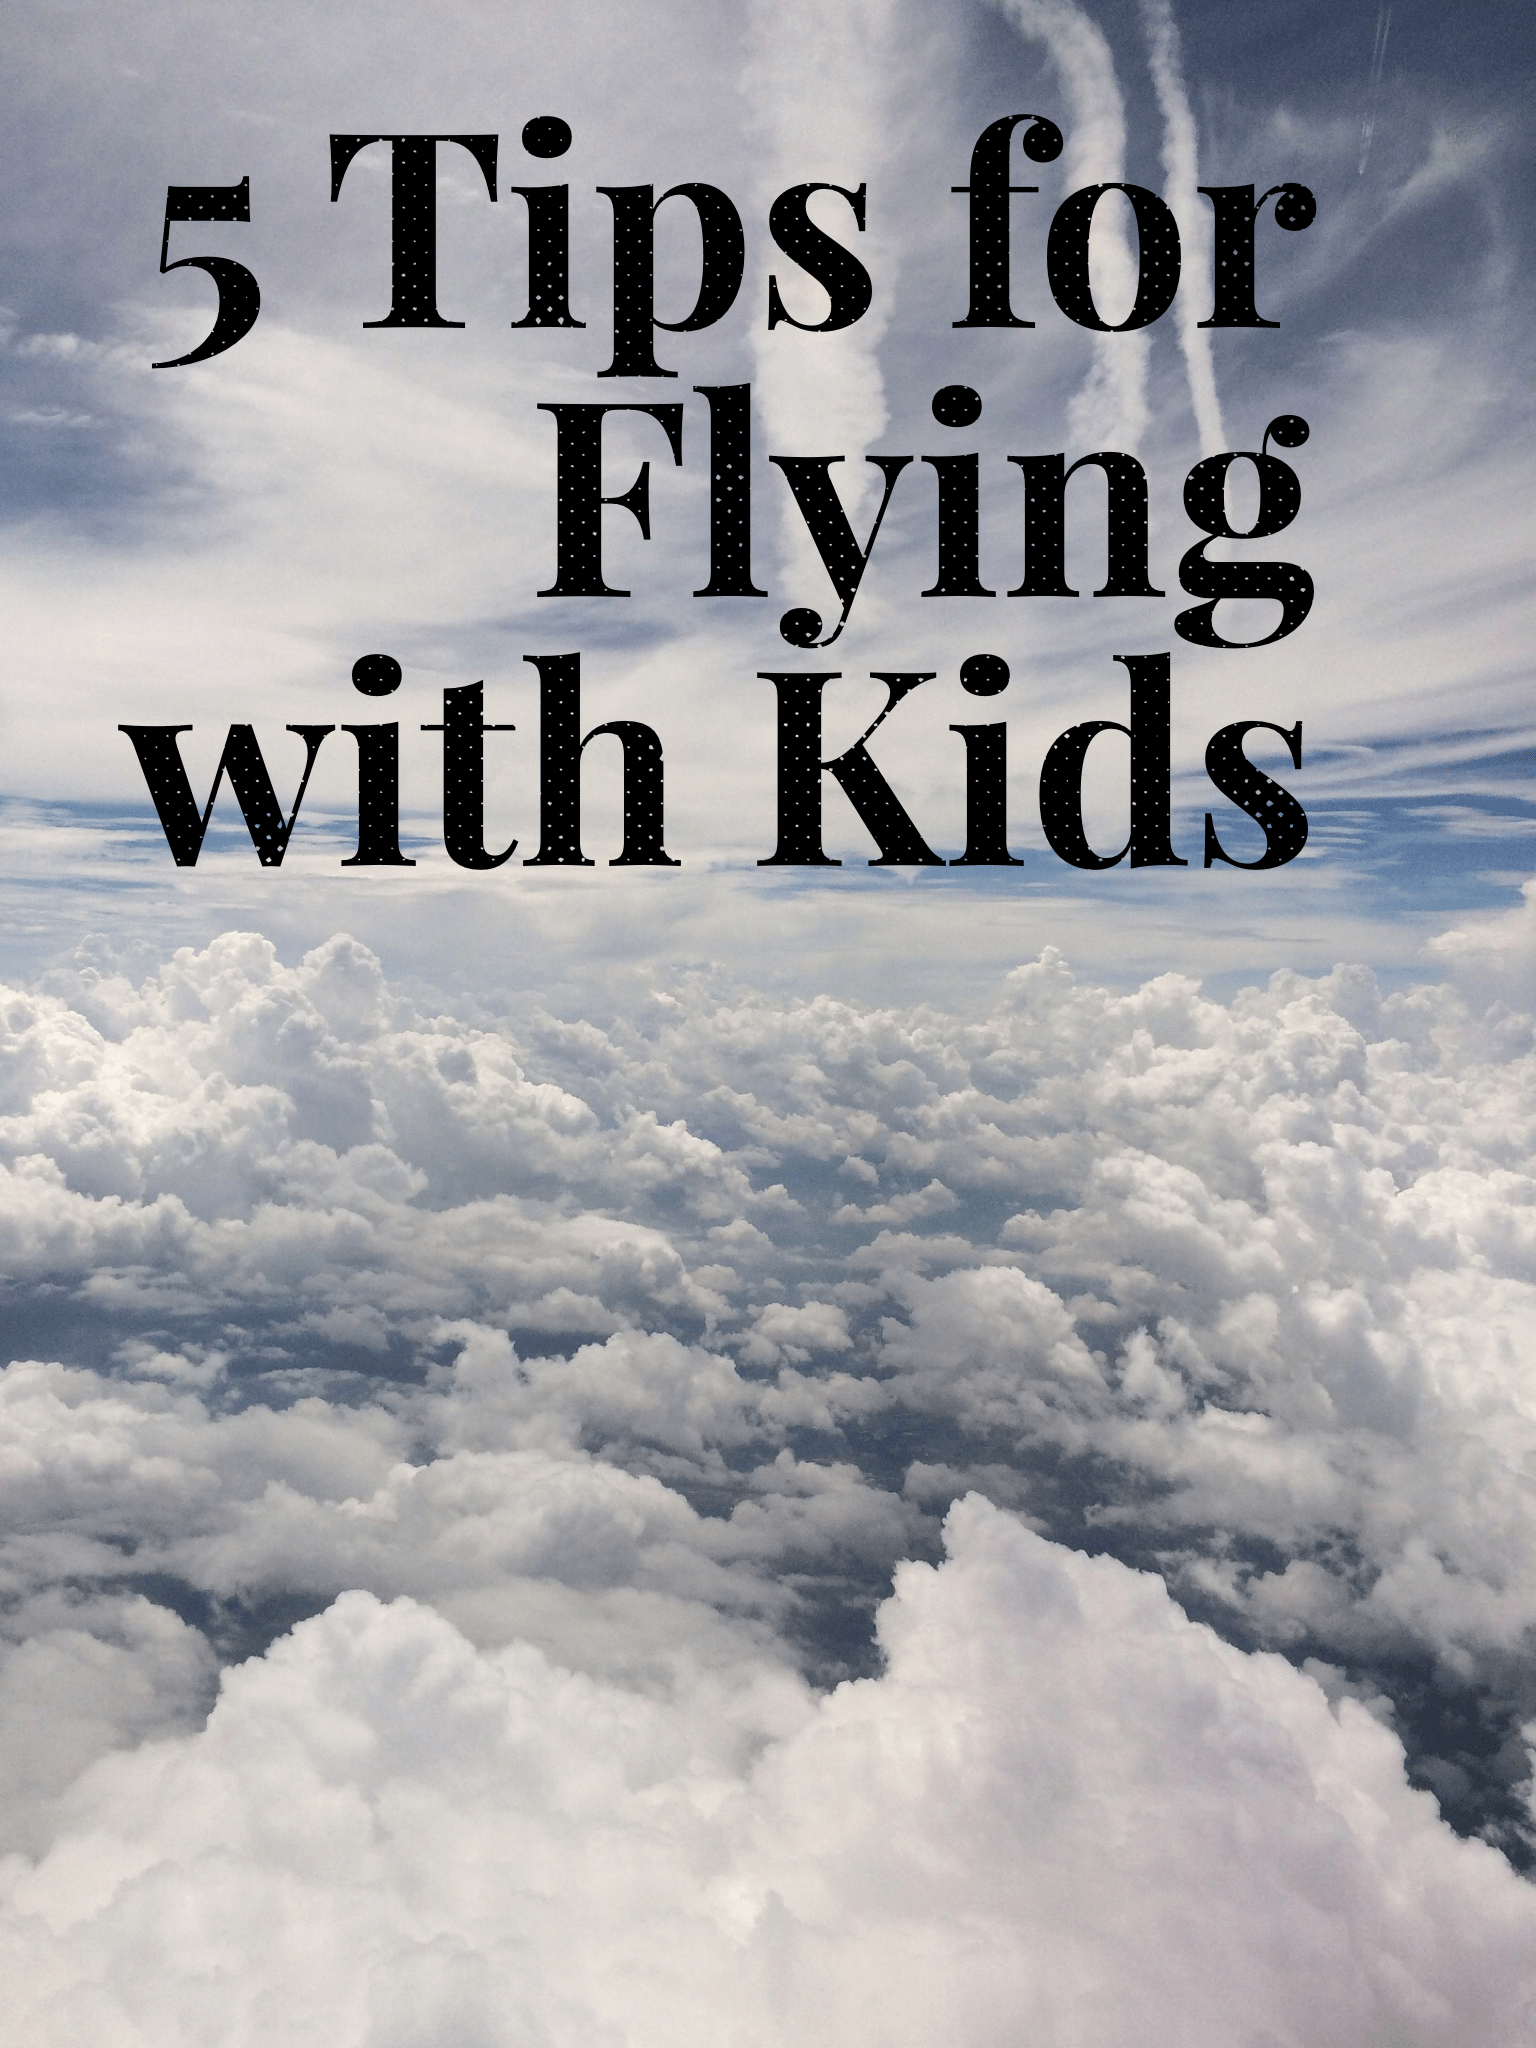 These 5 tips for flying with kids will make airplane travel much easier on both you and your kids. With a bit of preparation it will be smooth sailing!